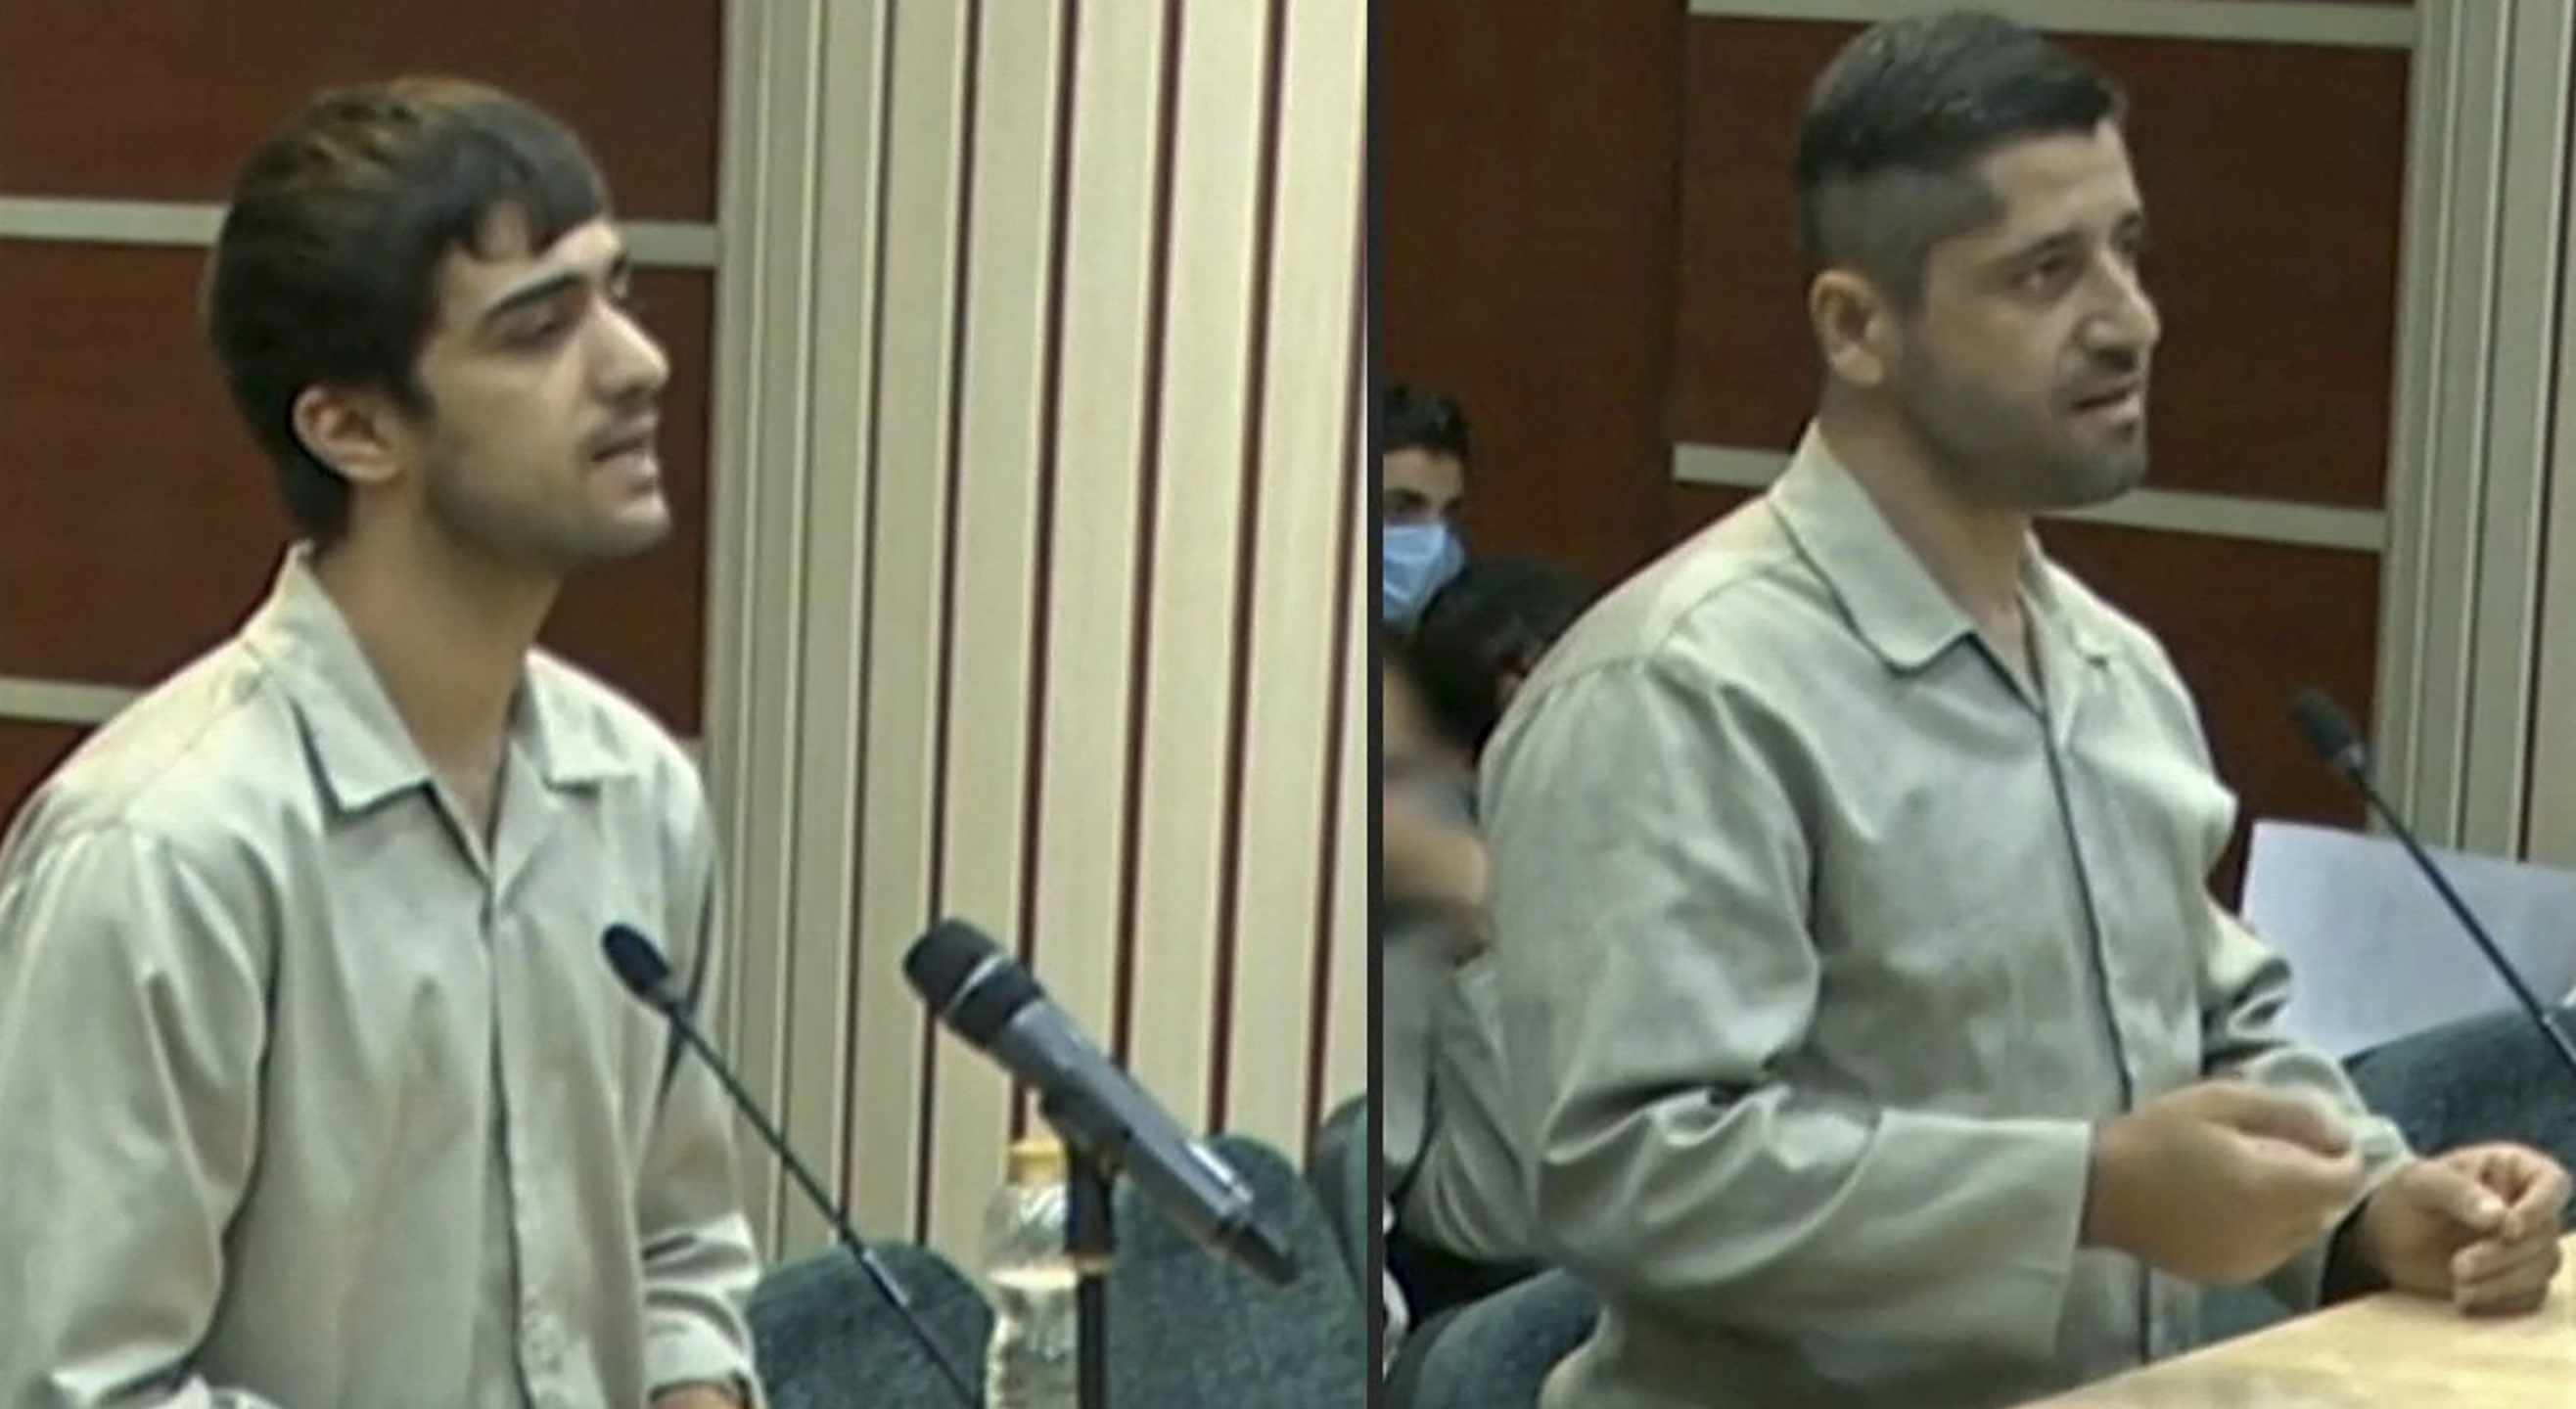 TOPSHOT - An image grab of footage obtained from Iranian State TV IRINN on January 7, 2023 shows Mohammad Mahdi Karami and Seyyed Mohammad Hosseini, who were executed for killing a member of  lt;HIT gt;Iran lt;/HIT gt;'s Basij paramilitary force amid protests, attending a court hearing in Karaj on December 5. - The latest hangings double the number of executions to four over the nationwide protests, which escalated since mid-September into calls for an end to  lt;HIT gt;Iran lt;/HIT gt;'s clerical regime. (Photo by IRINN / AFP) / RESTRICTED TO EDITORIAL USE - MANDATORY CREDIT - AFP PHOTO / HO / IRINN" NO MARKETING NO ADVERTISING CAMPAIGNS - DISTRIBUTED AS A SERVICE TO CLIENTS FROM ALTERNATIVE SOURCES, AFP IS NOT RESPONSIBLE FOR ANY DIGITAL ALTERATIONS TO THE PICTURE'S EDITORIAL CONTENT, DATE AND LOCATION WHICH CANNOT BE INDEPENDENTLY VERIFIED - NO RESALE - NO ACCESS ISRAEL MEDIA/PERSIAN LANGUAGE TV STATIONS/ OUTSIDE  lt;HIT gt;IRAN/ lt;/HIT gt; STRICTLY NI ACCESS BBC PERSIAN/ VOA PERSIAN/ MANOTO-1 TV/  lt;HIT gt;IRAN lt;/HIT gt; INTERNATIONAL /